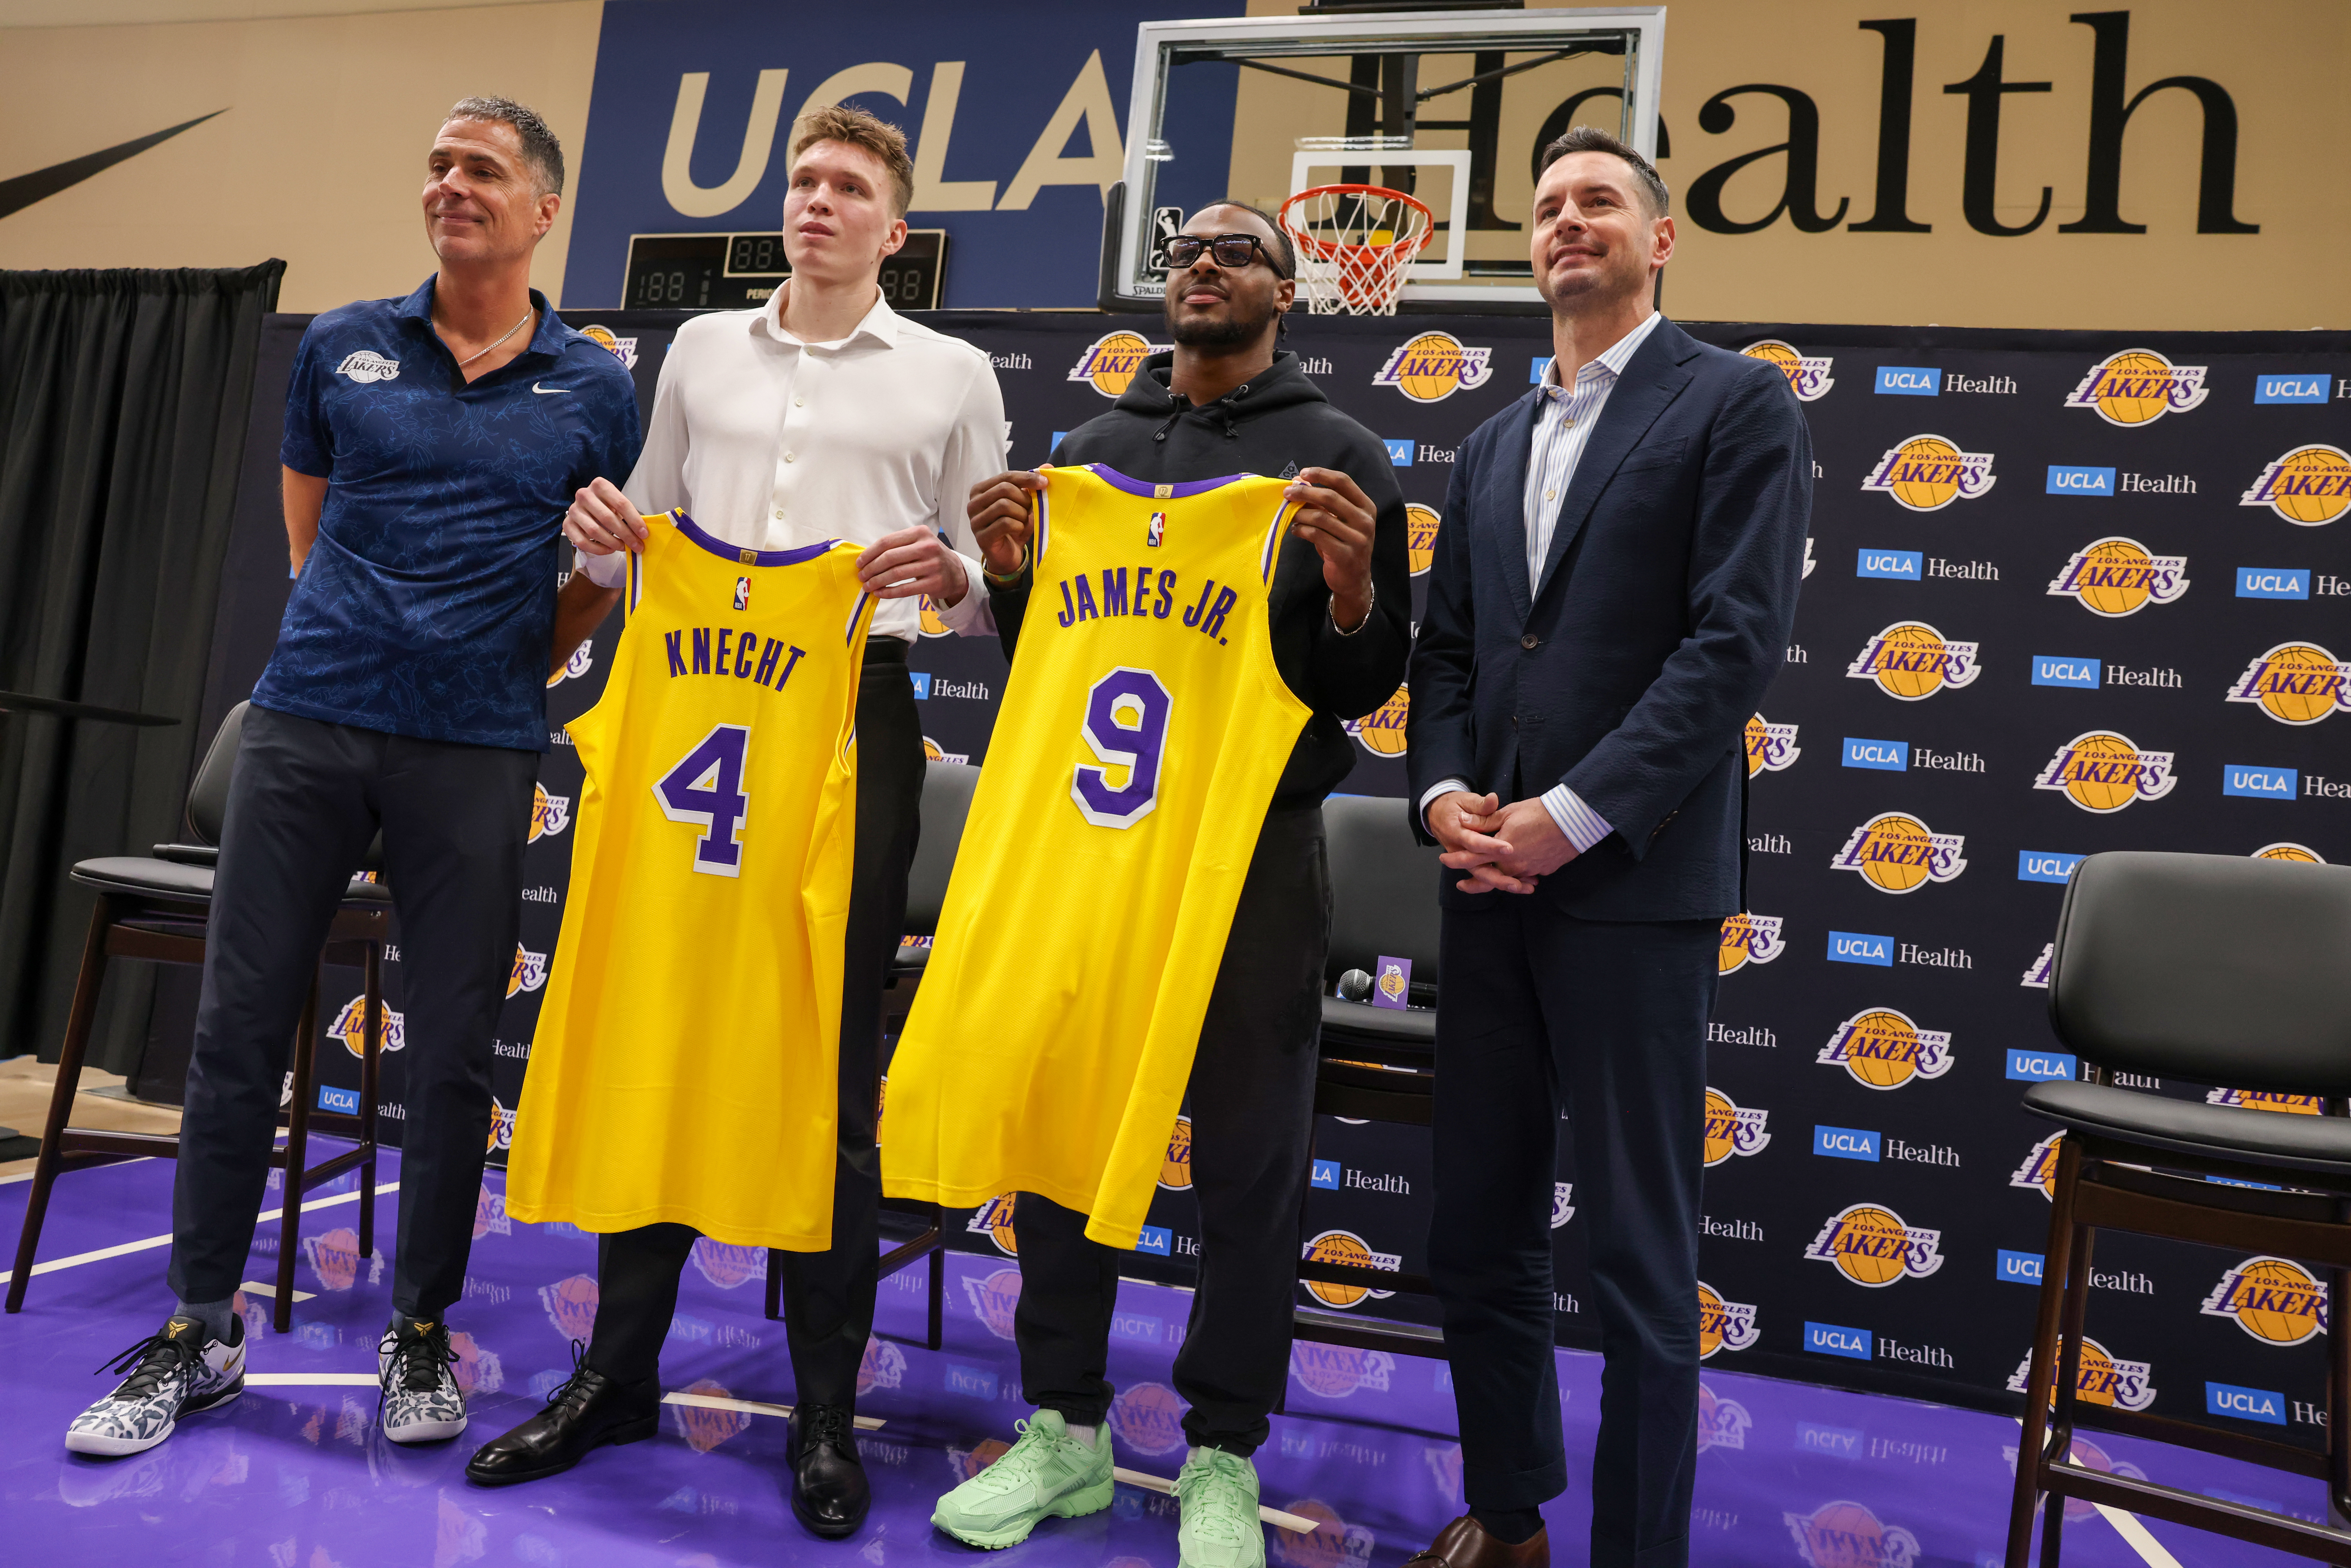 Lakers draft picks Dalton Knecht and Bronny James hold up jerseys while standing beside Rob Pelinka and JJ Redick